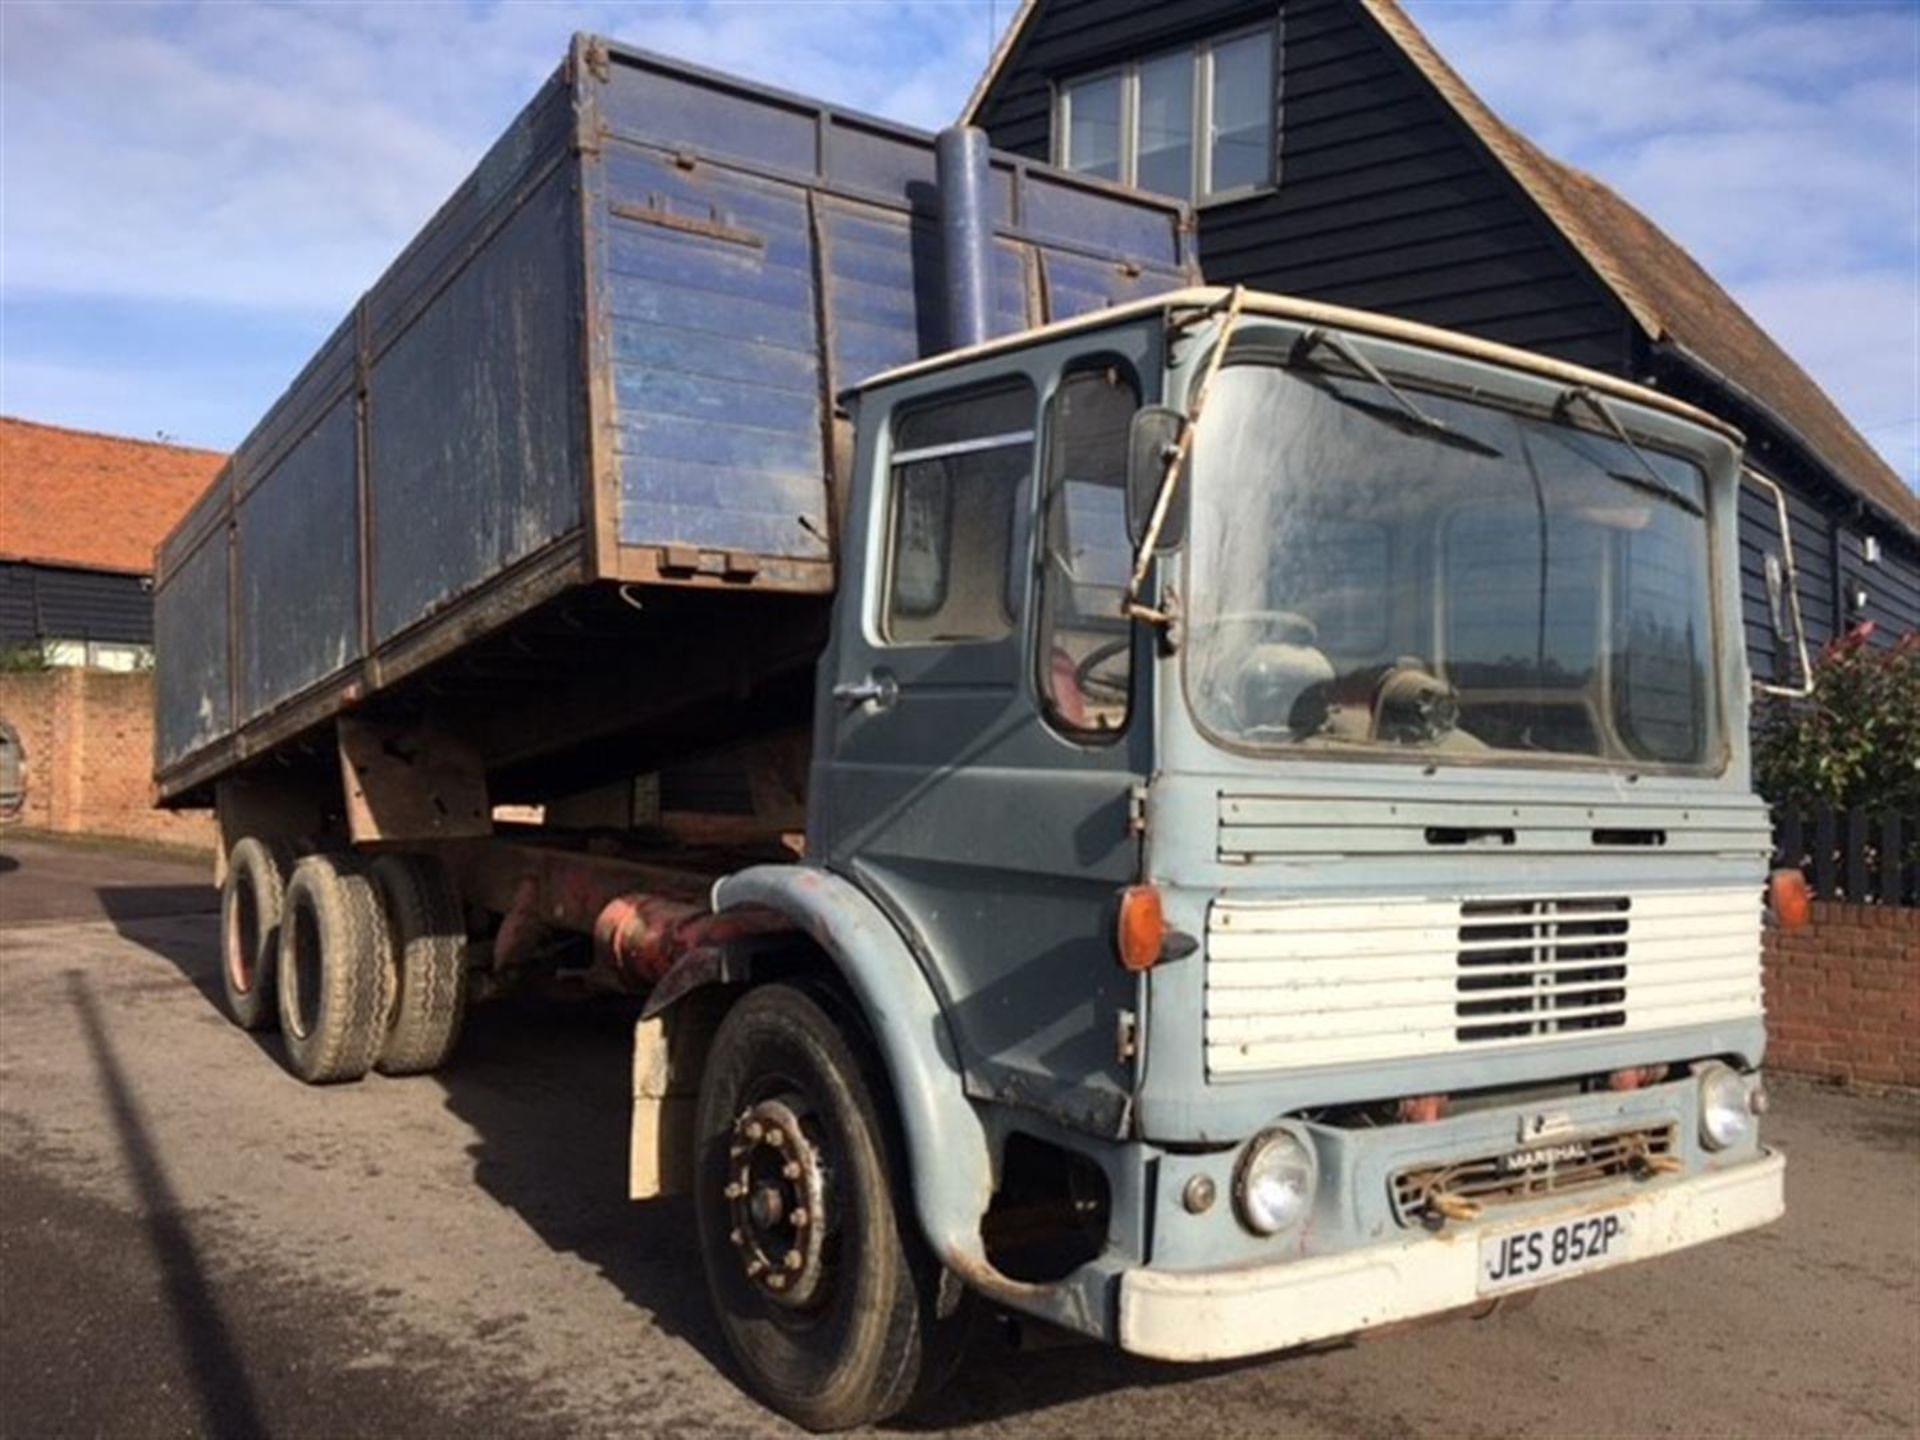 1975 AEC Leyland Marshall Tipper Reg. No. JES 852P Chassis No. 2TGM6RT31370 A two owner from new